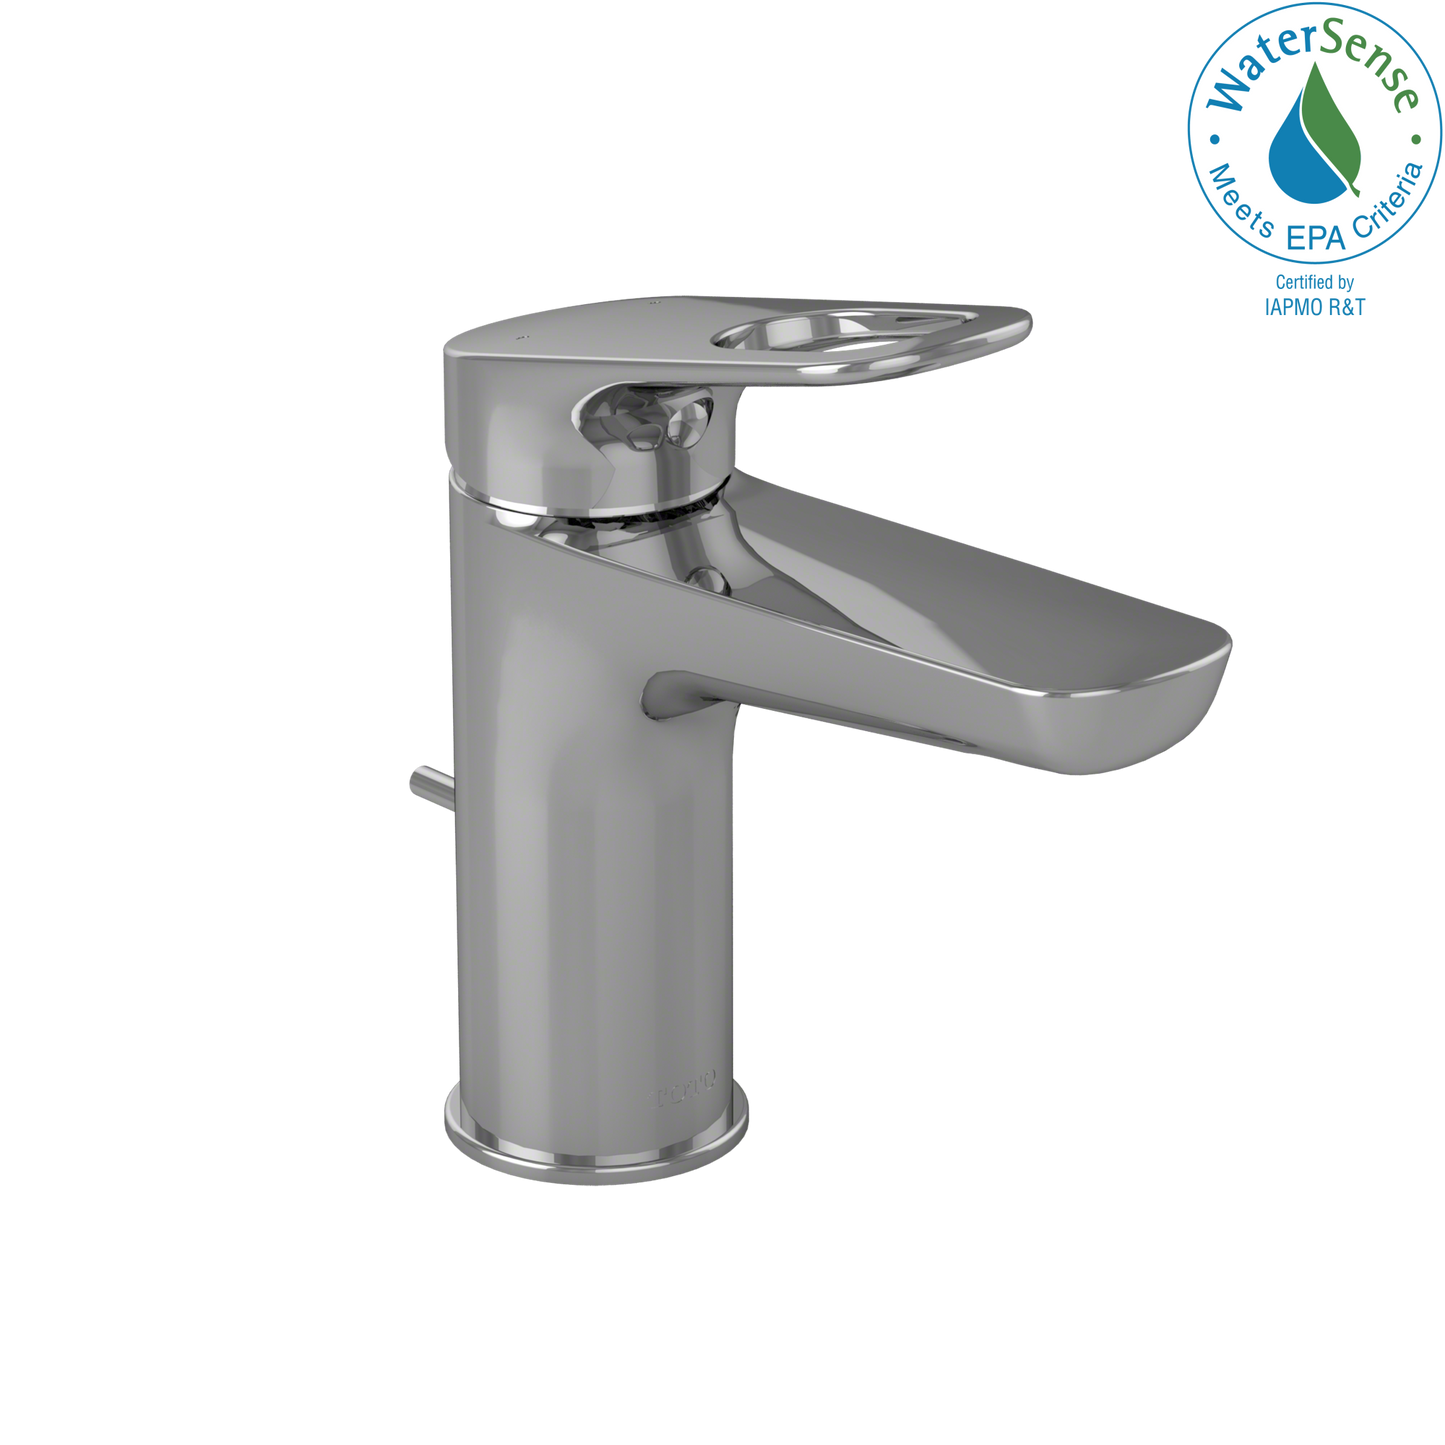 Toto TL362SD#CP - Oberon-R - Single Hole Deck Mount Bathroom Faucet with Low Flow WaterSense